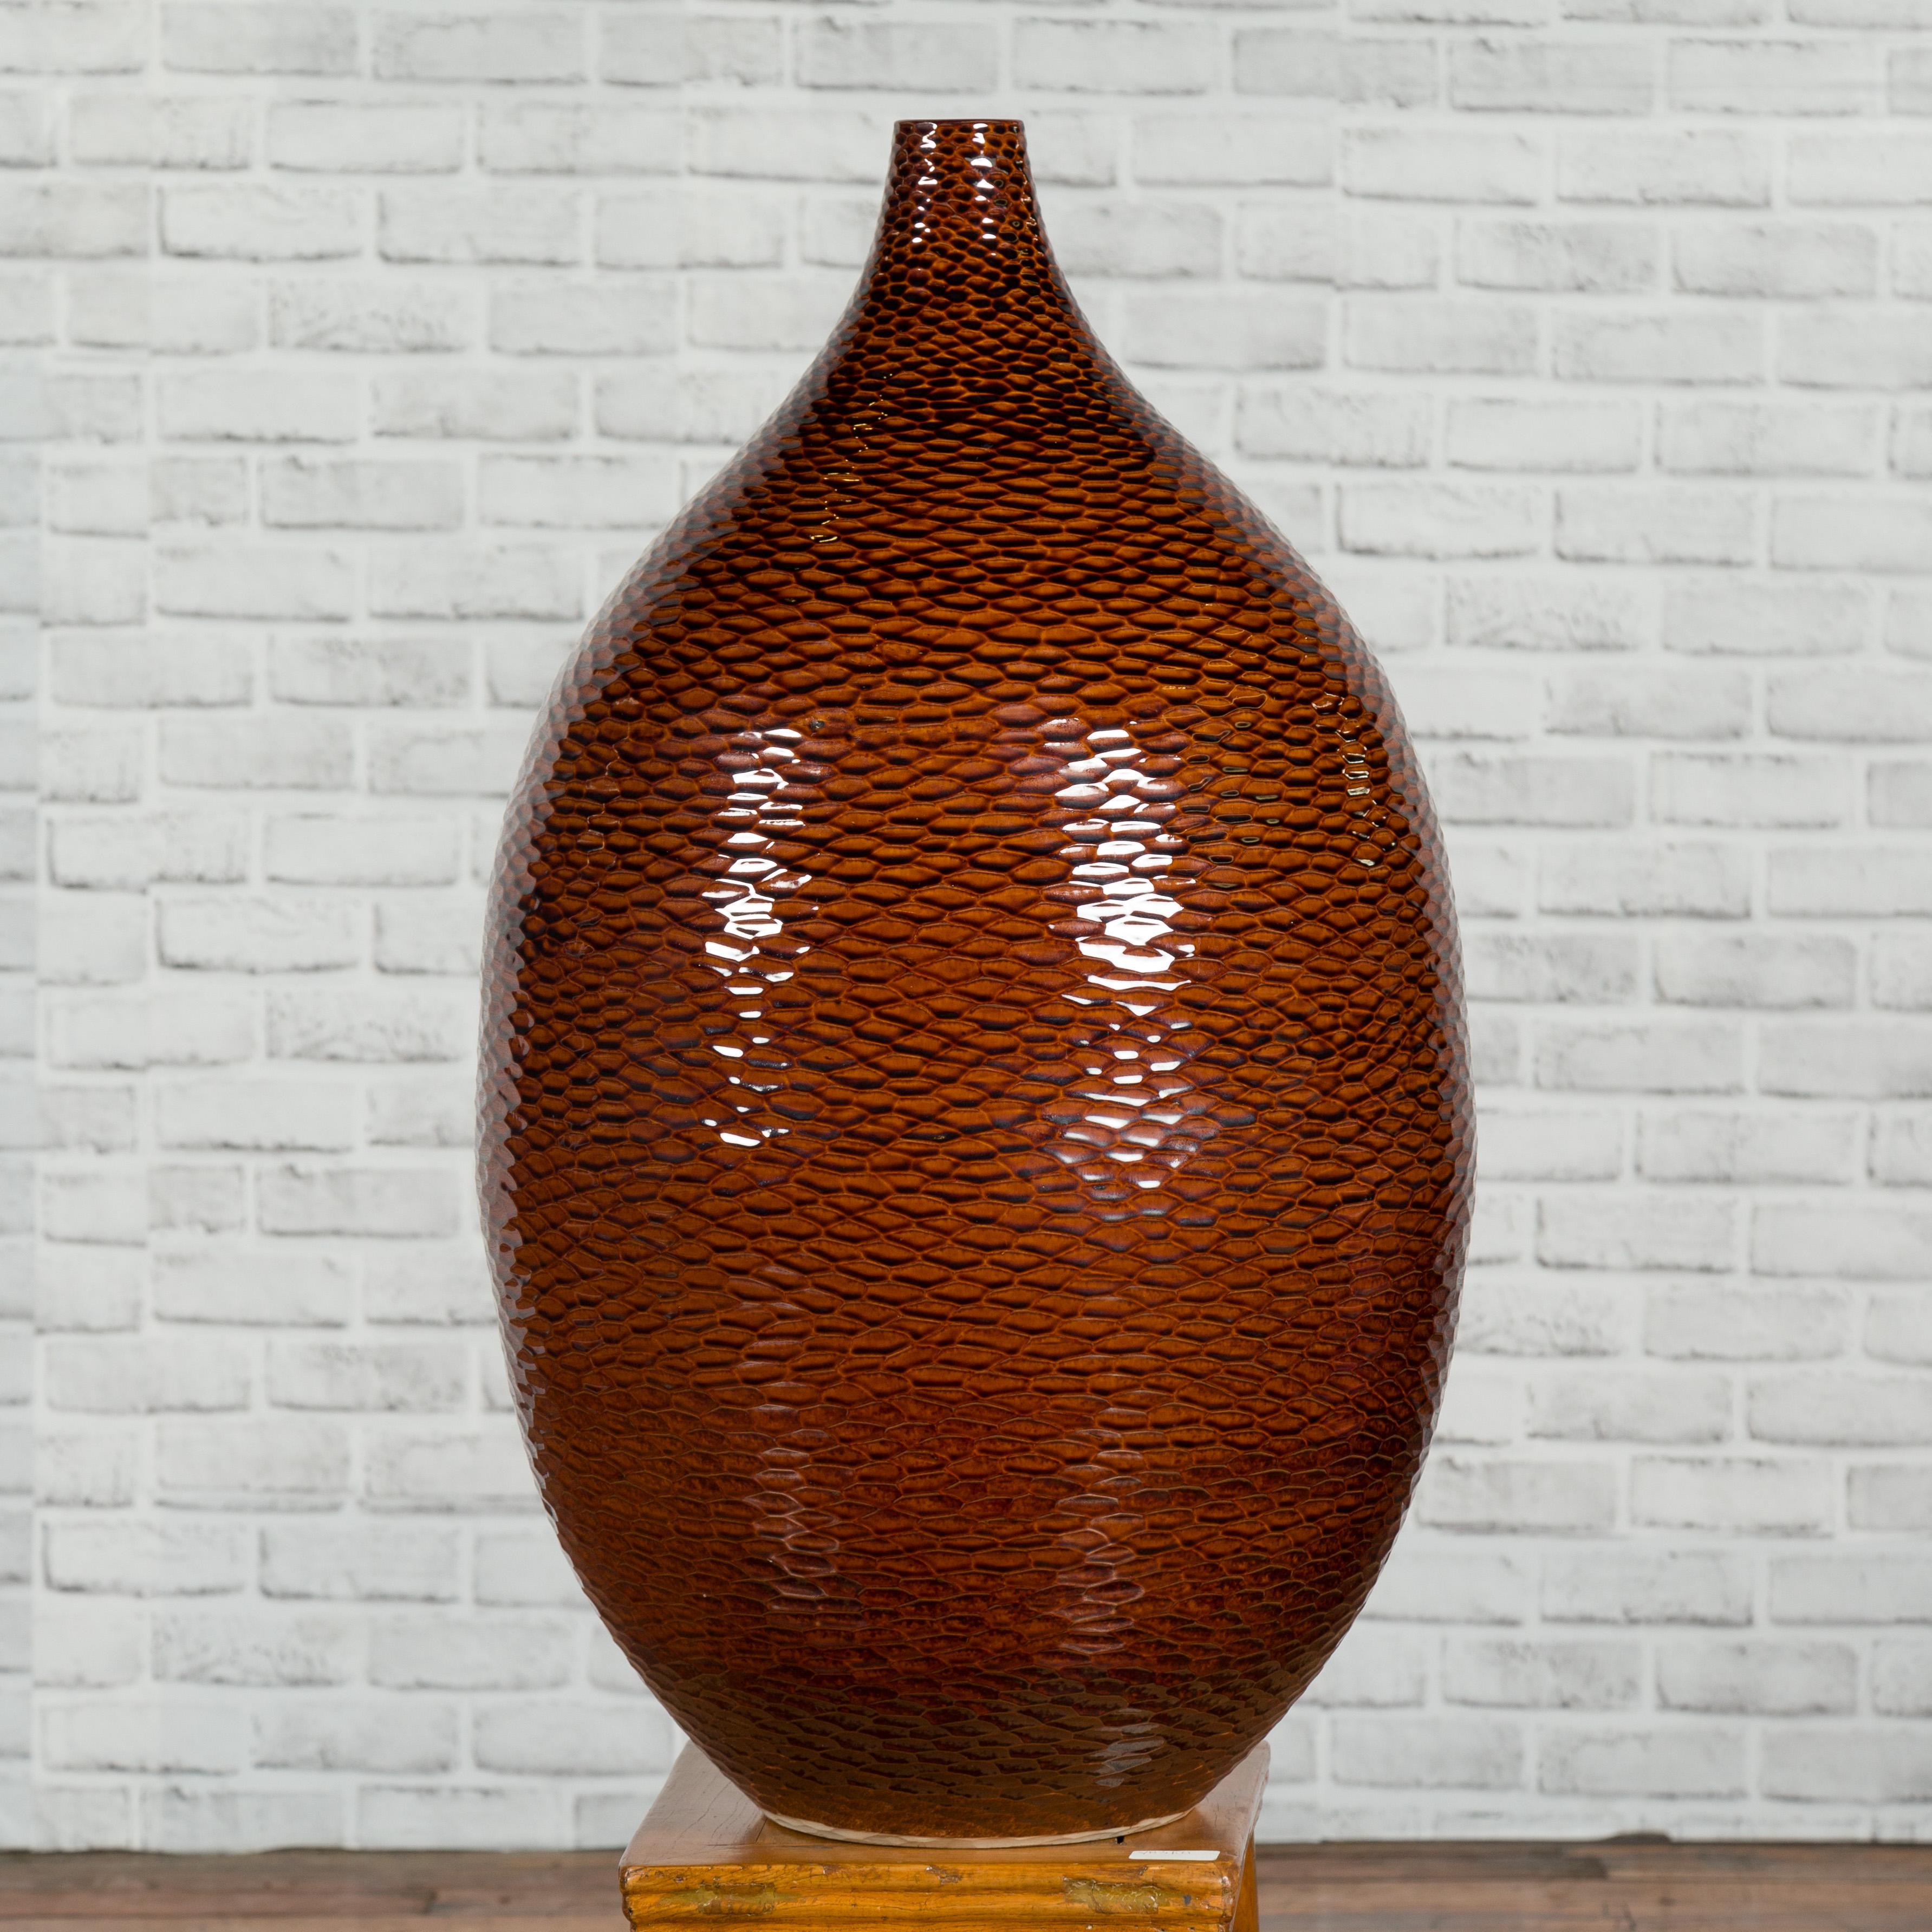 Thai Chiang Mai Brown Textured Teardrop Shaped Vase from the Prem Collection For Sale 6